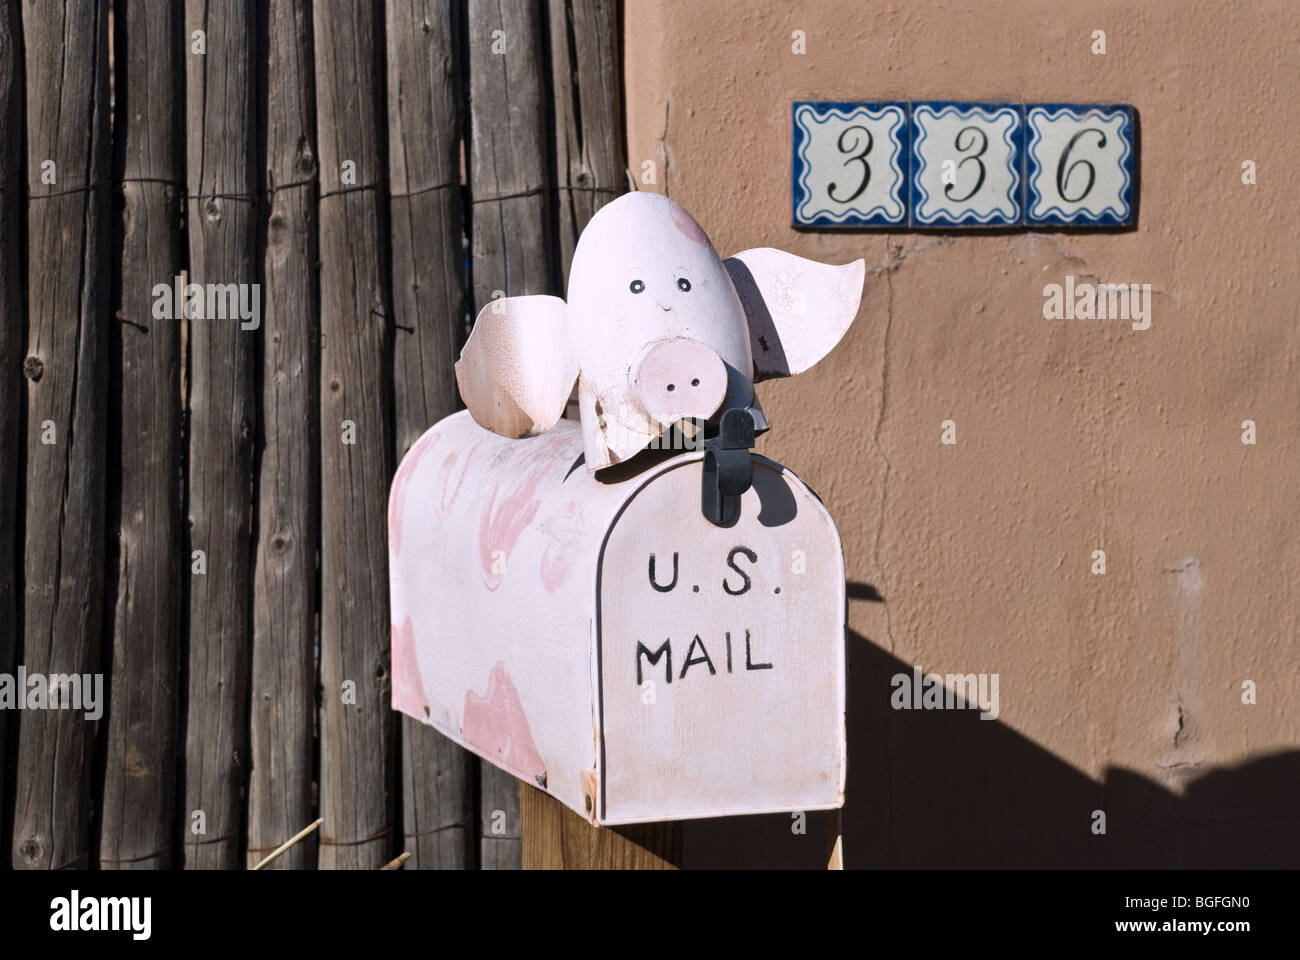 'If pigs could fly', this pig would deliver the mail for the residents of this home in Santa Fe, New Mexico. Stock Photo